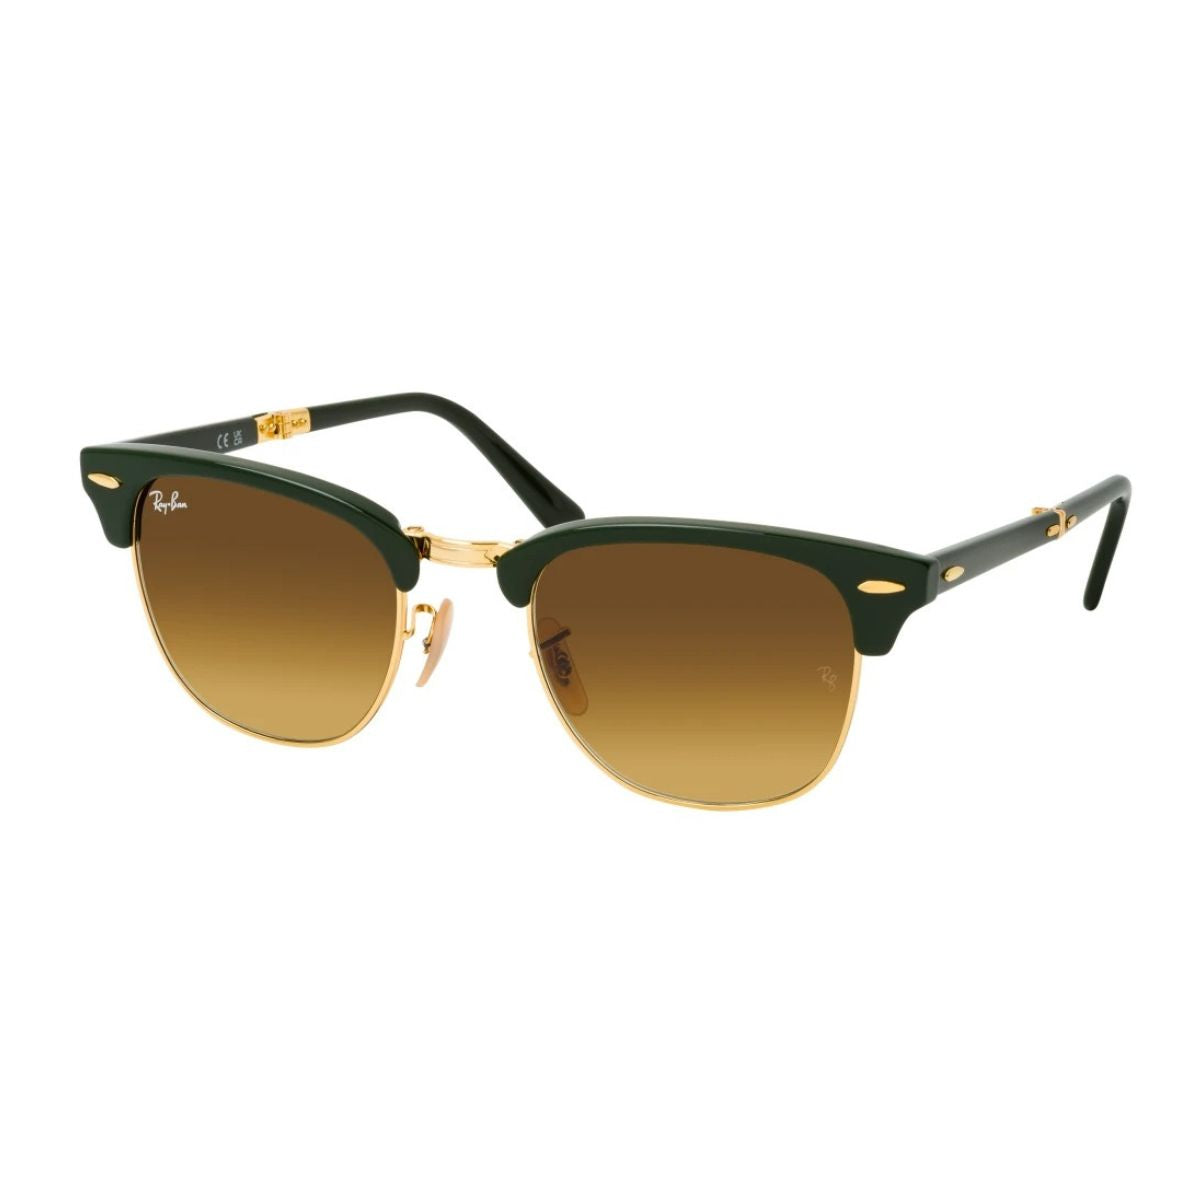 "Buy Ray Ban 2176 1368/85 Square Frame UV Sunglasses For Men And Women At Optorium"